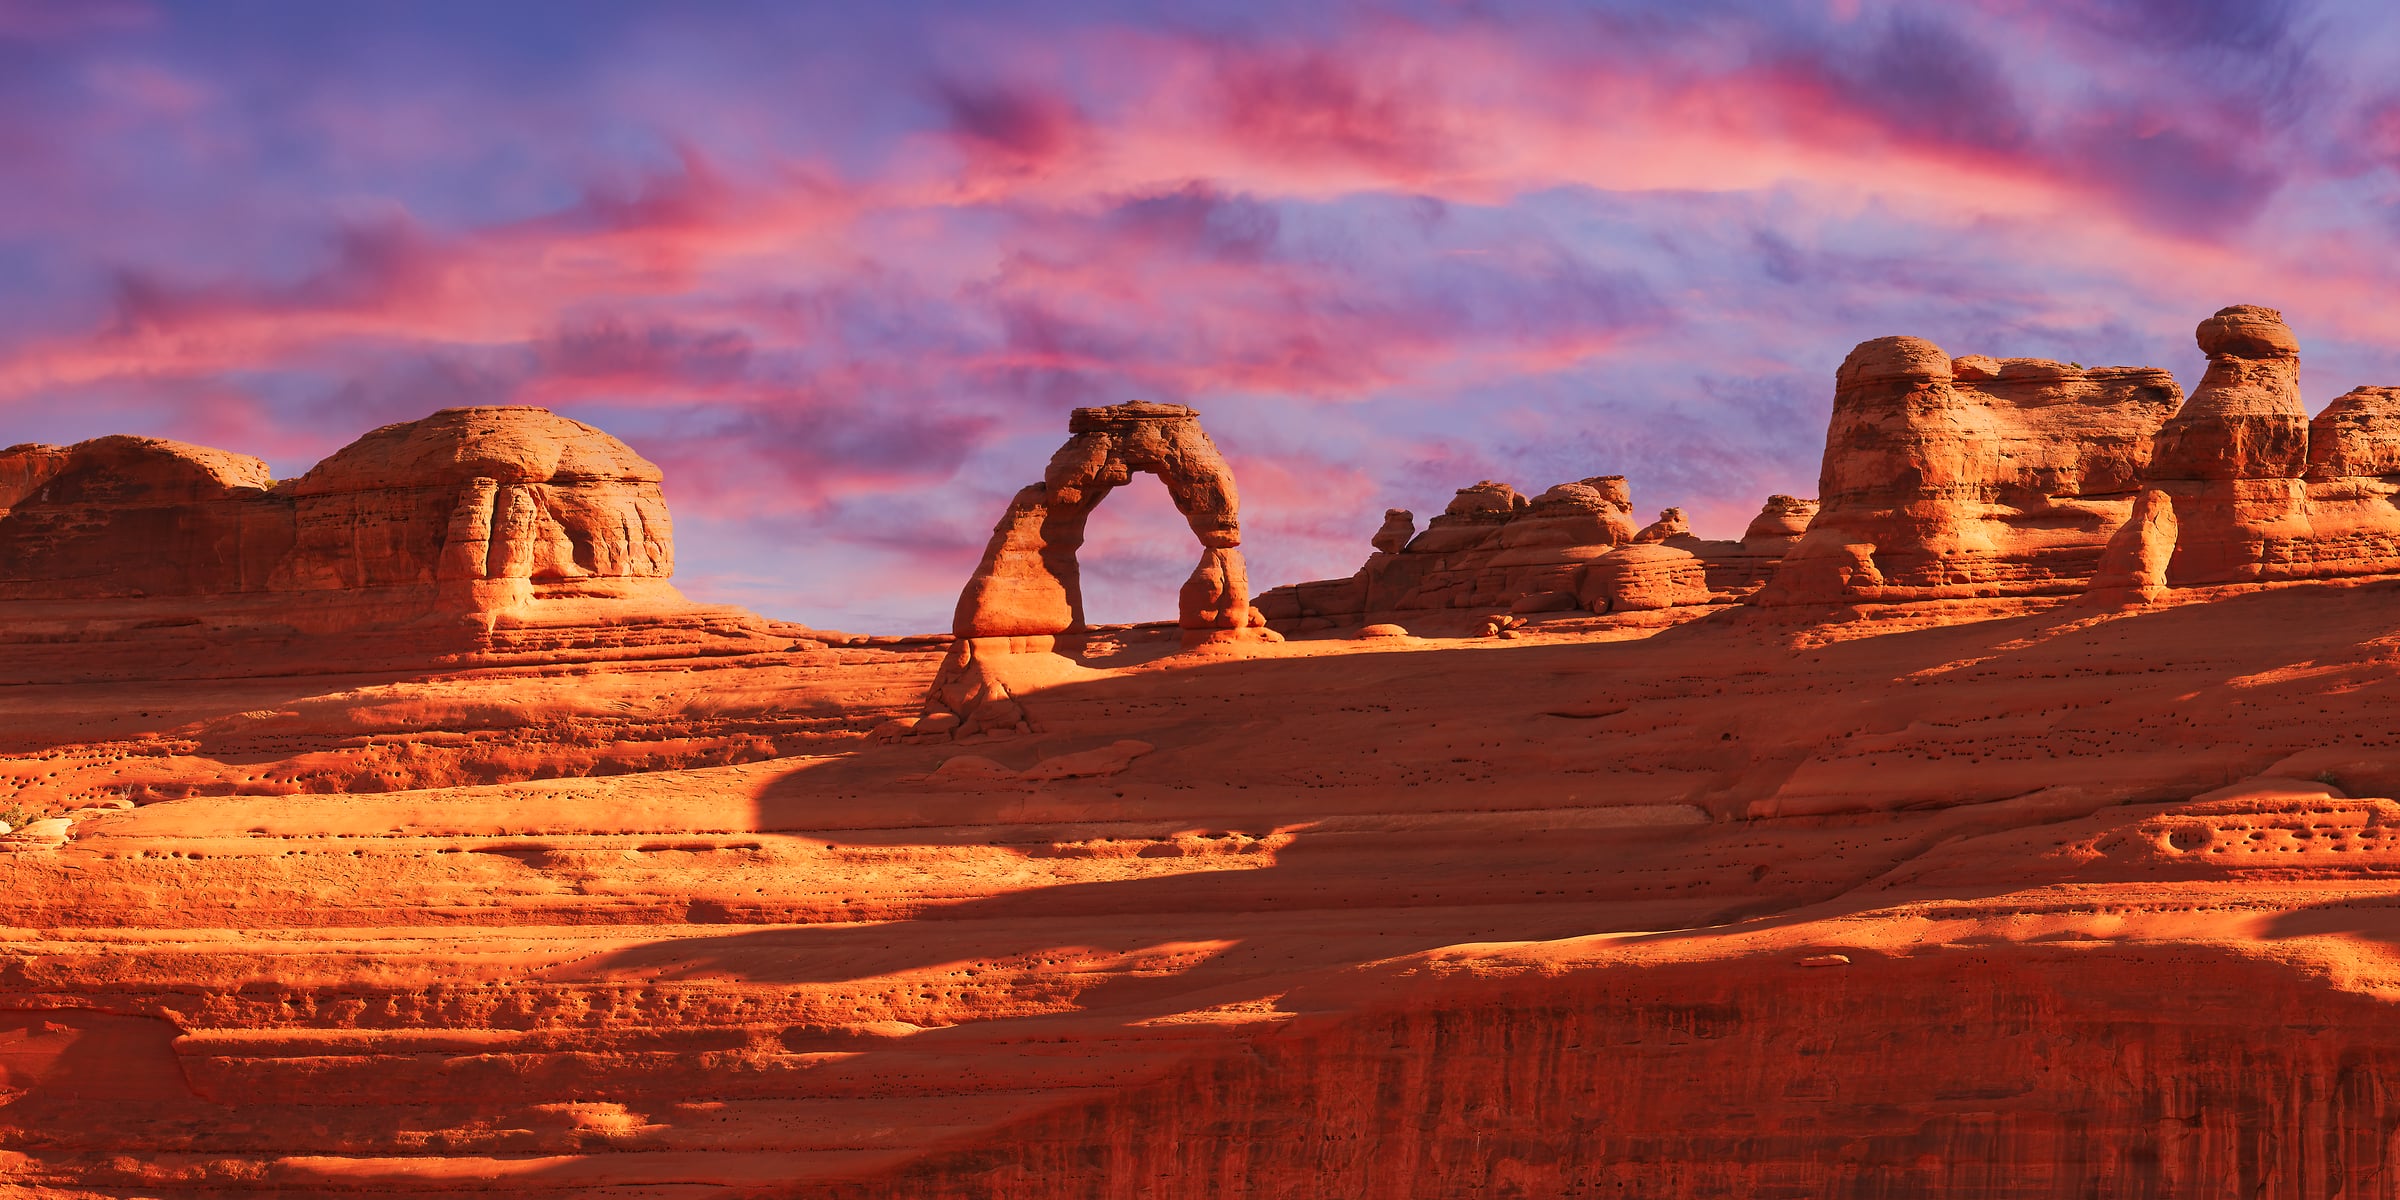 169 megapixels! A very high resolution, large-format VAST photo print of Delicate Arch at sunset in Arches National Park; landscape photograph created by David David in Utah